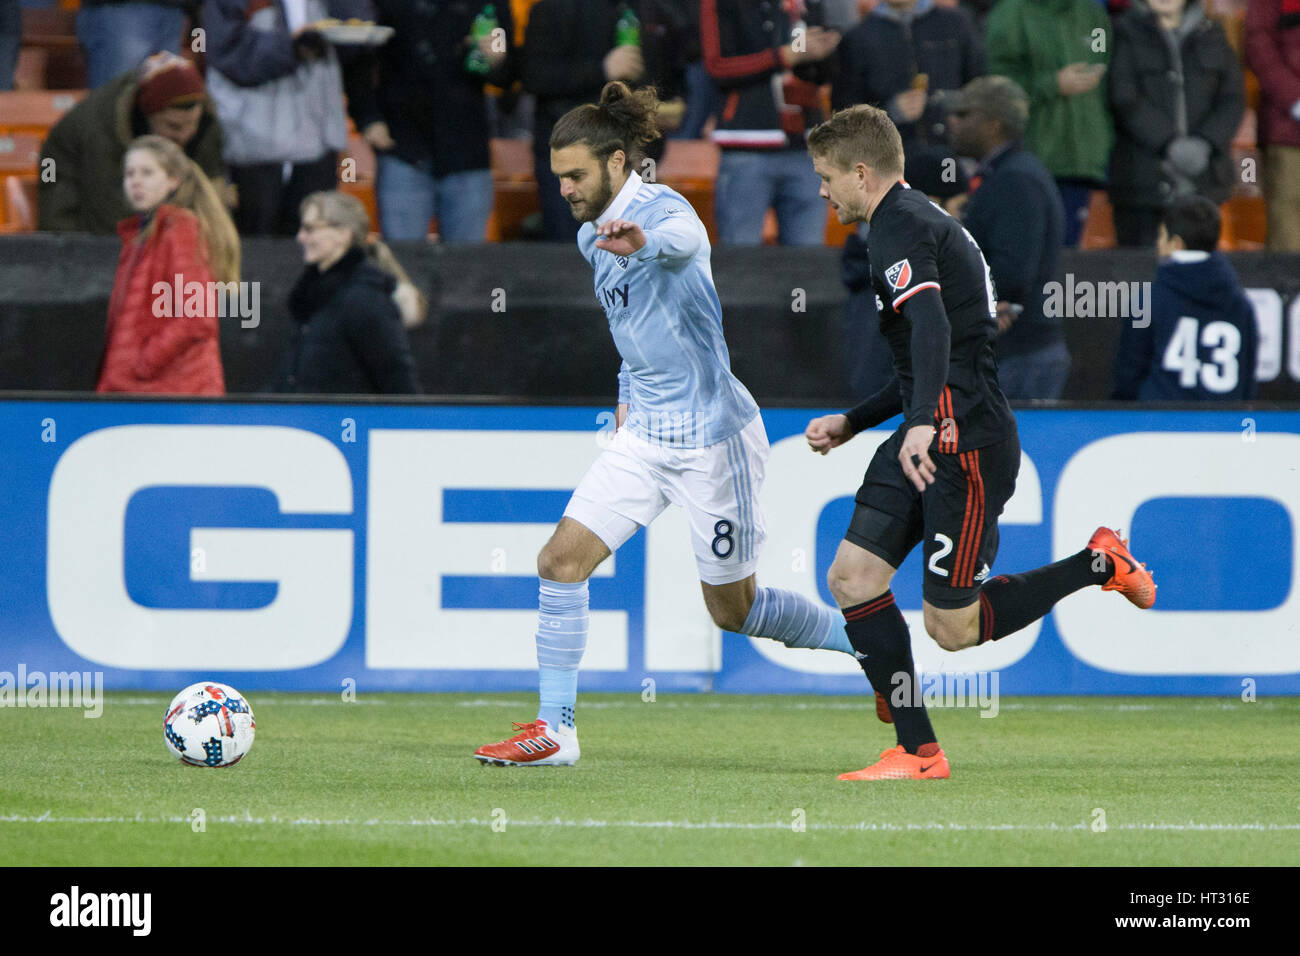 Sporting Kansas City midfielder Graham Zusi (8) and D.C. United defender Taylor Kemp (2) during D.C. United's home opener against Sporting Kansas City which finished 0-0 at RFK Stadium in Washington, D.C. on Saturday March 4, 2017. Stock Photo